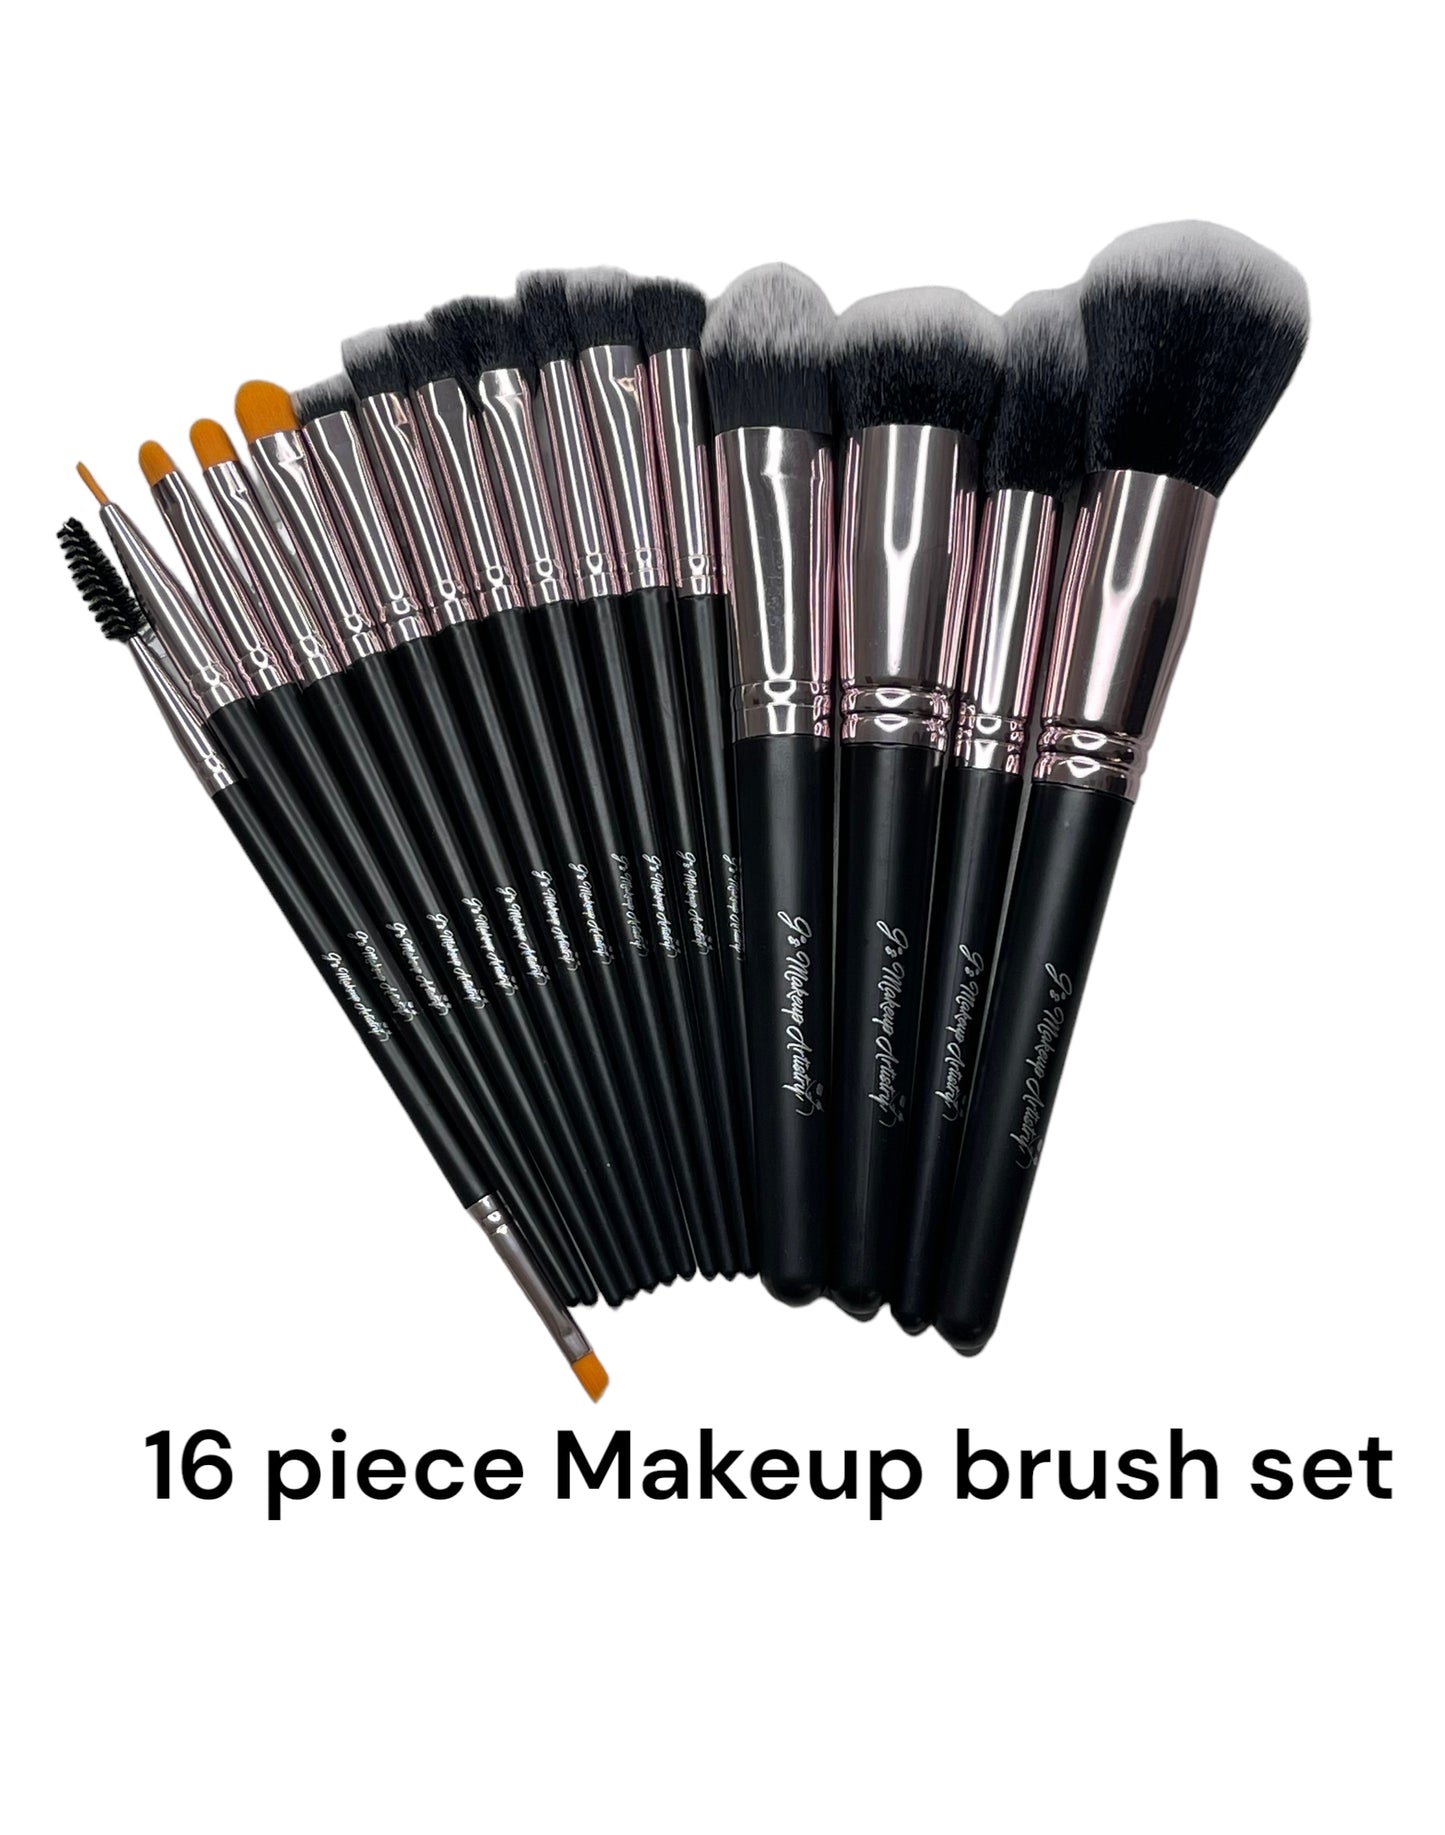 J's Makeup Artistry Branded Synthetic Makeup Brushes